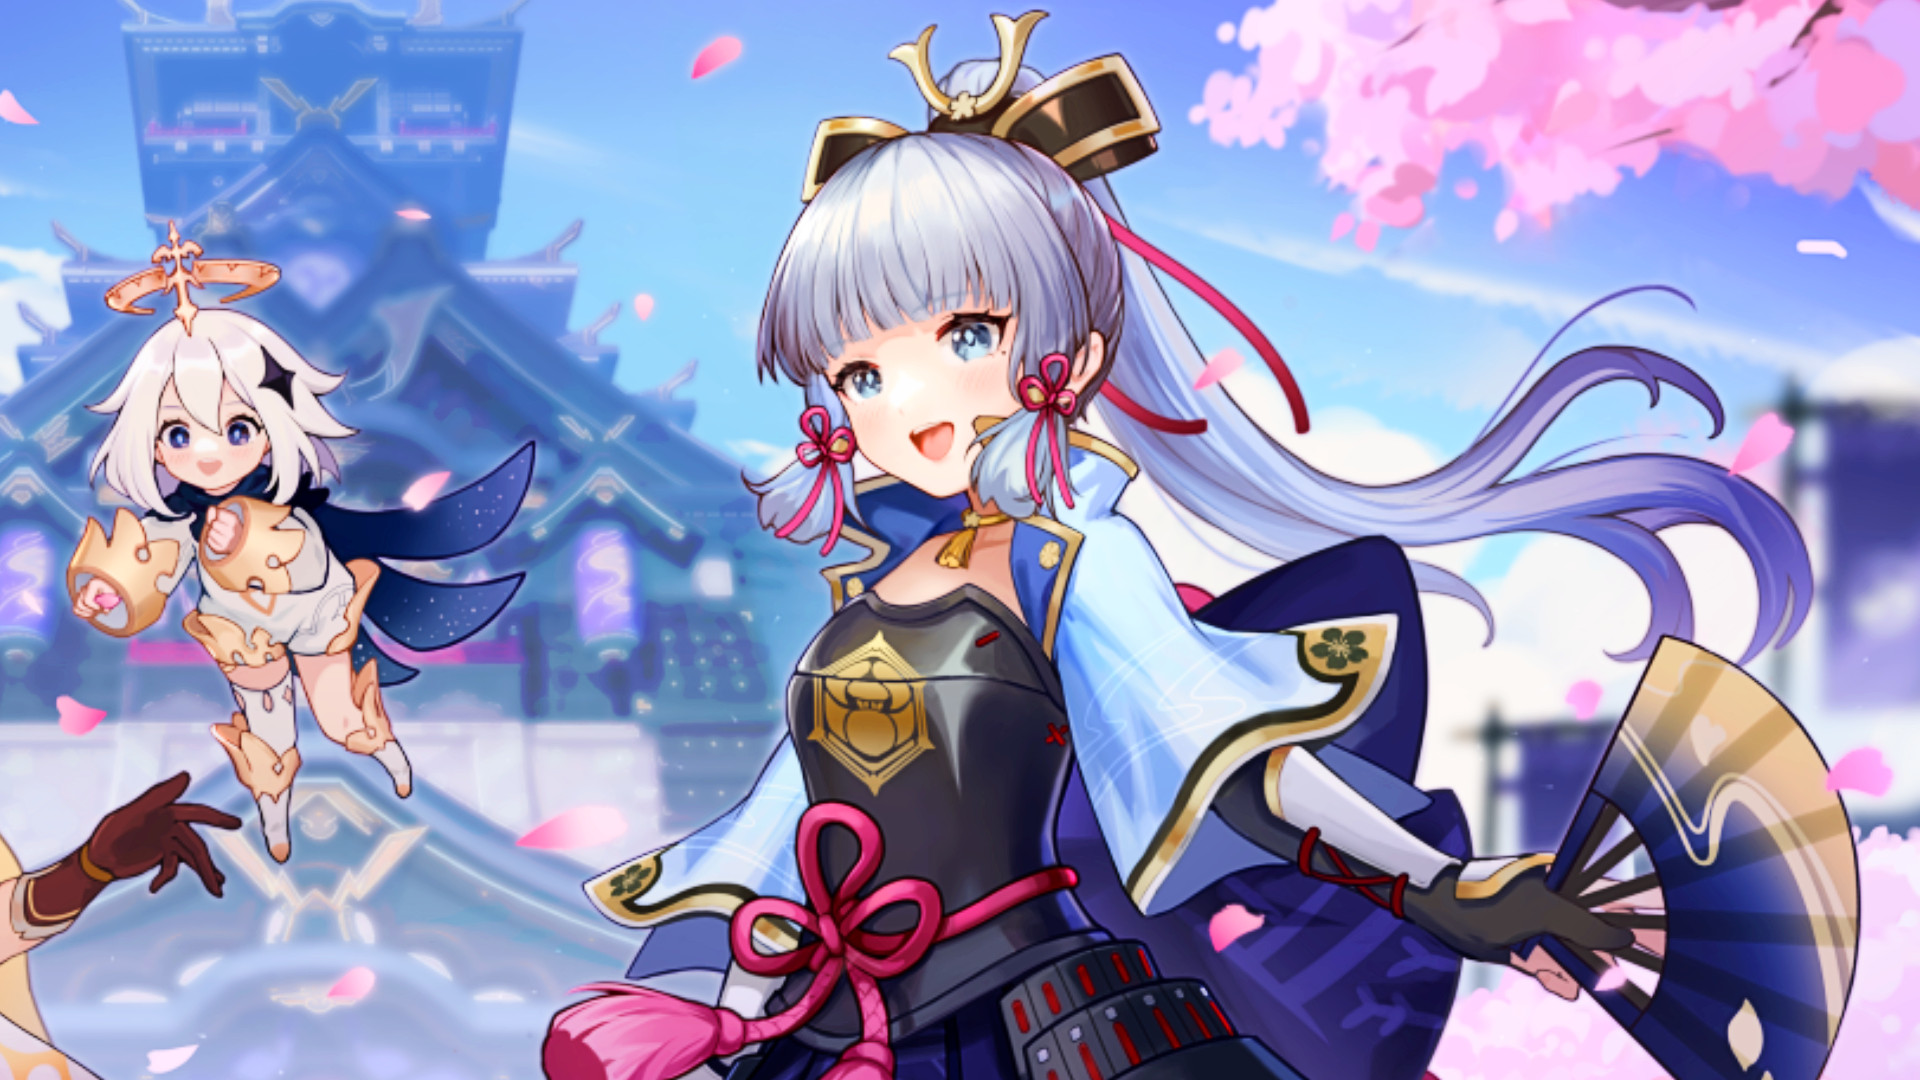 Genshin Impact Ayaka banner extended after 2.7 update delay